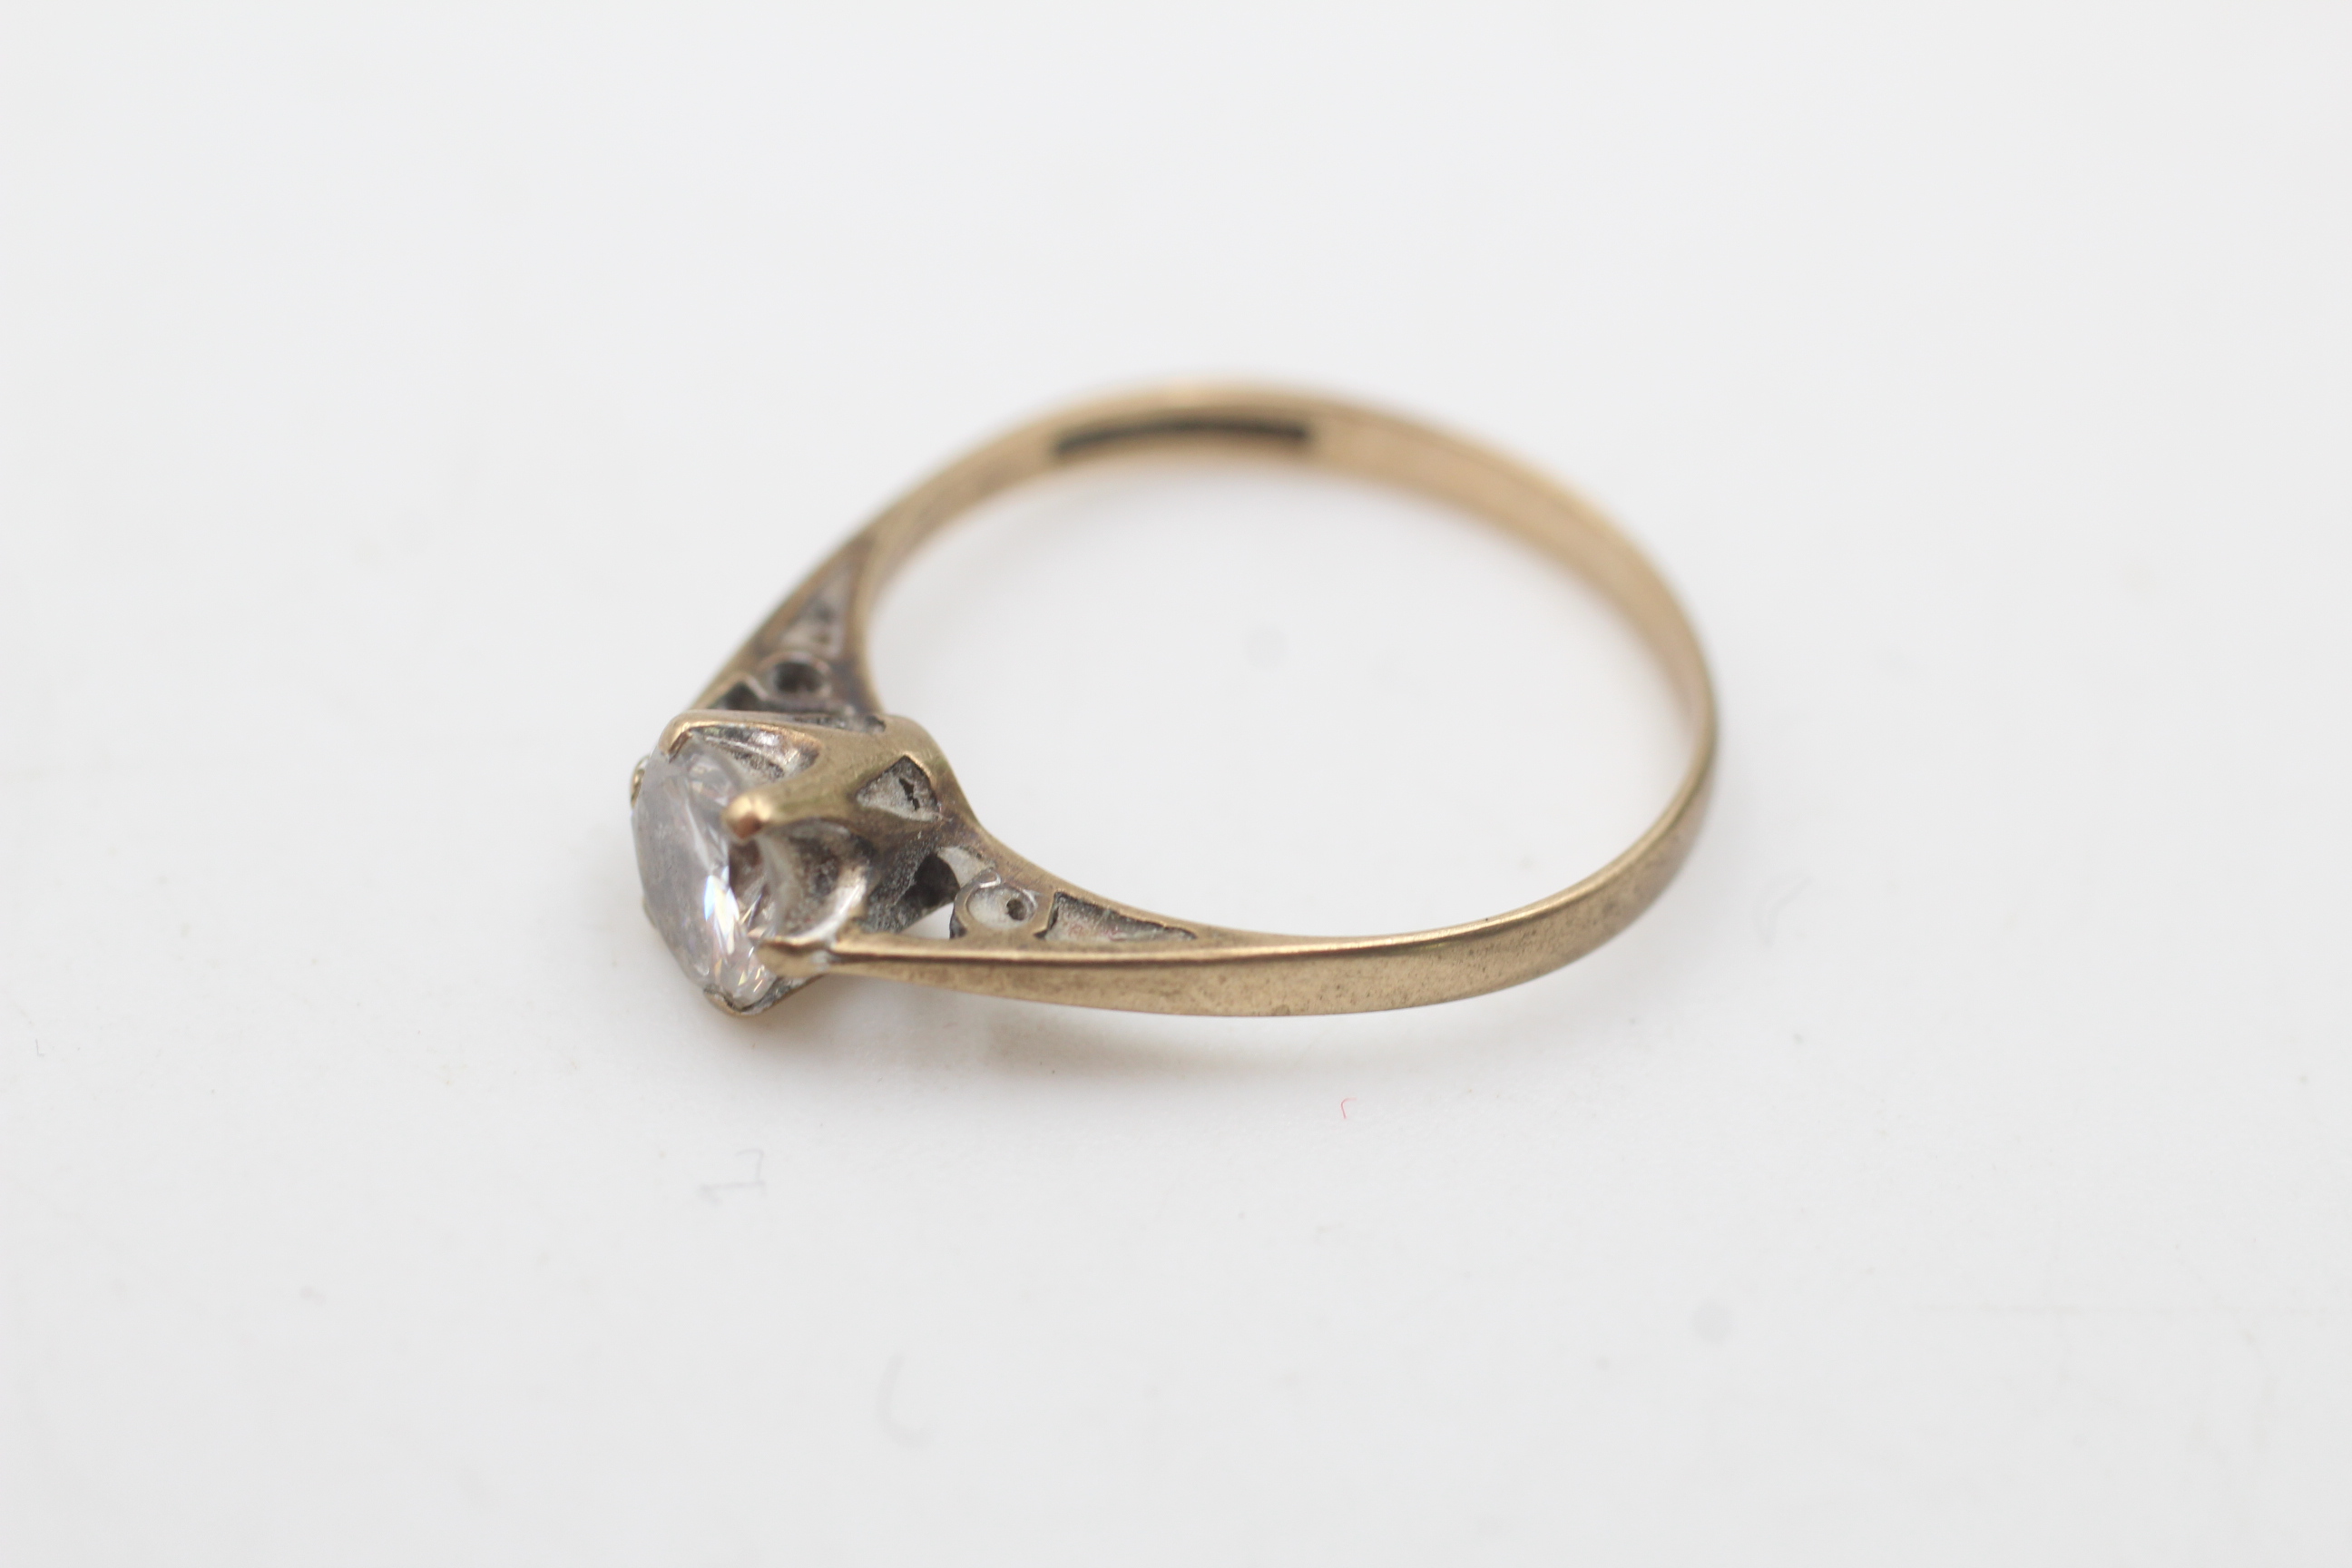 9ct gold clear gemstone solitaire ring (1.3g) - Image 2 of 5